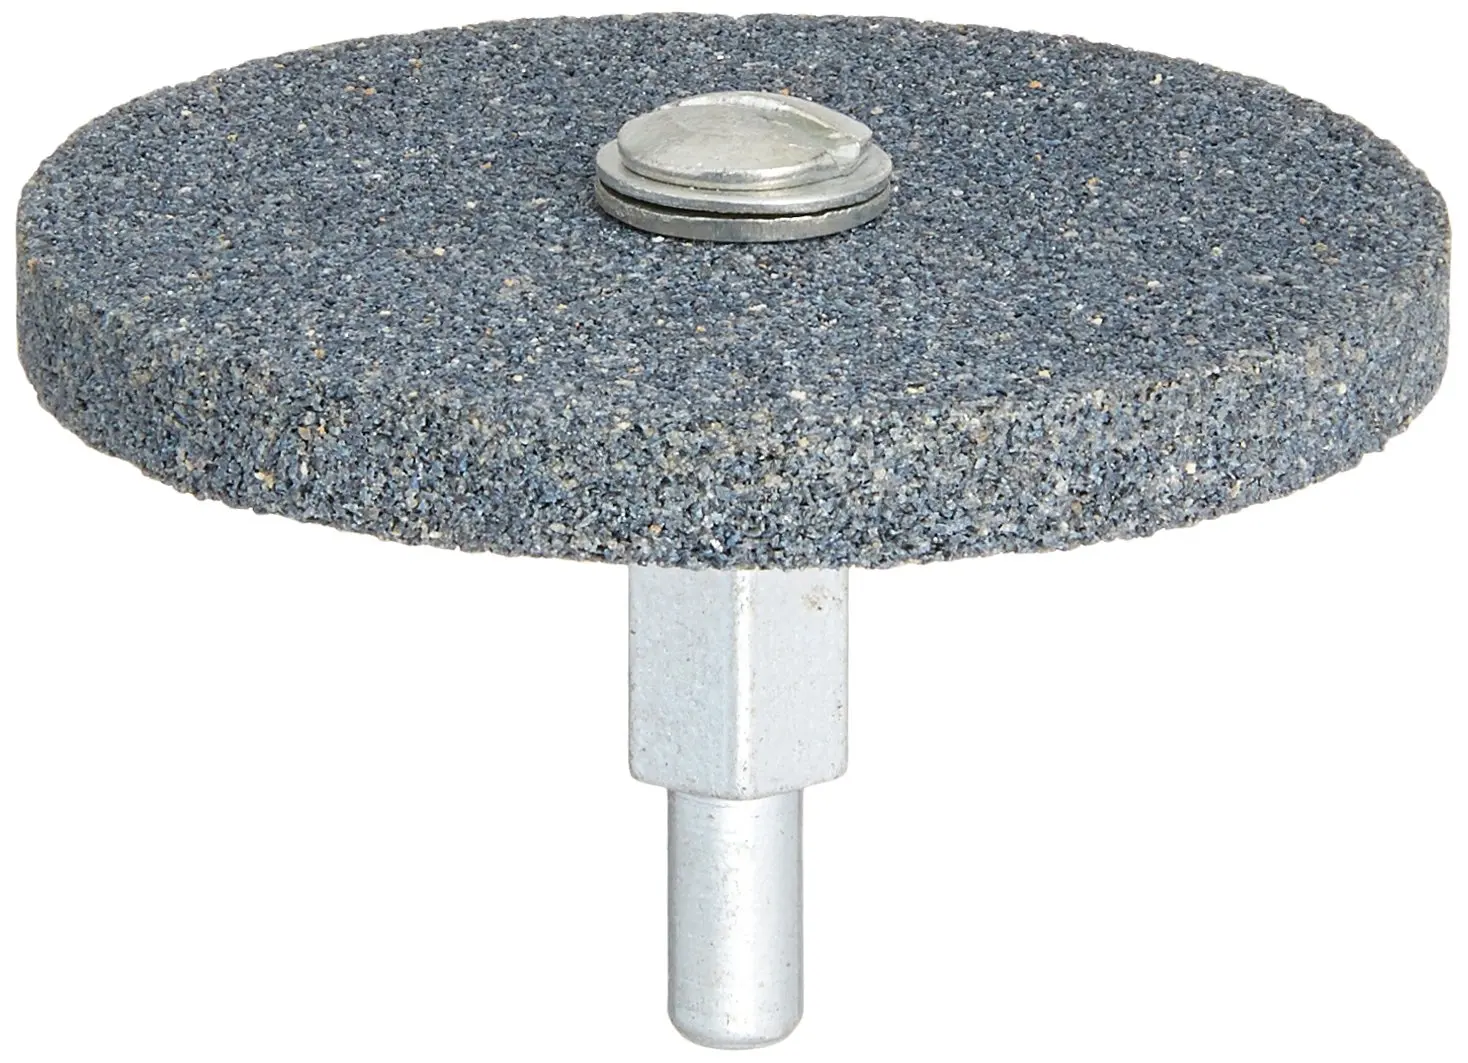 Forney 60052 Mounted Grinding Stone with 1/4-Inch Shank 2-Inch-by-1/4-Inch